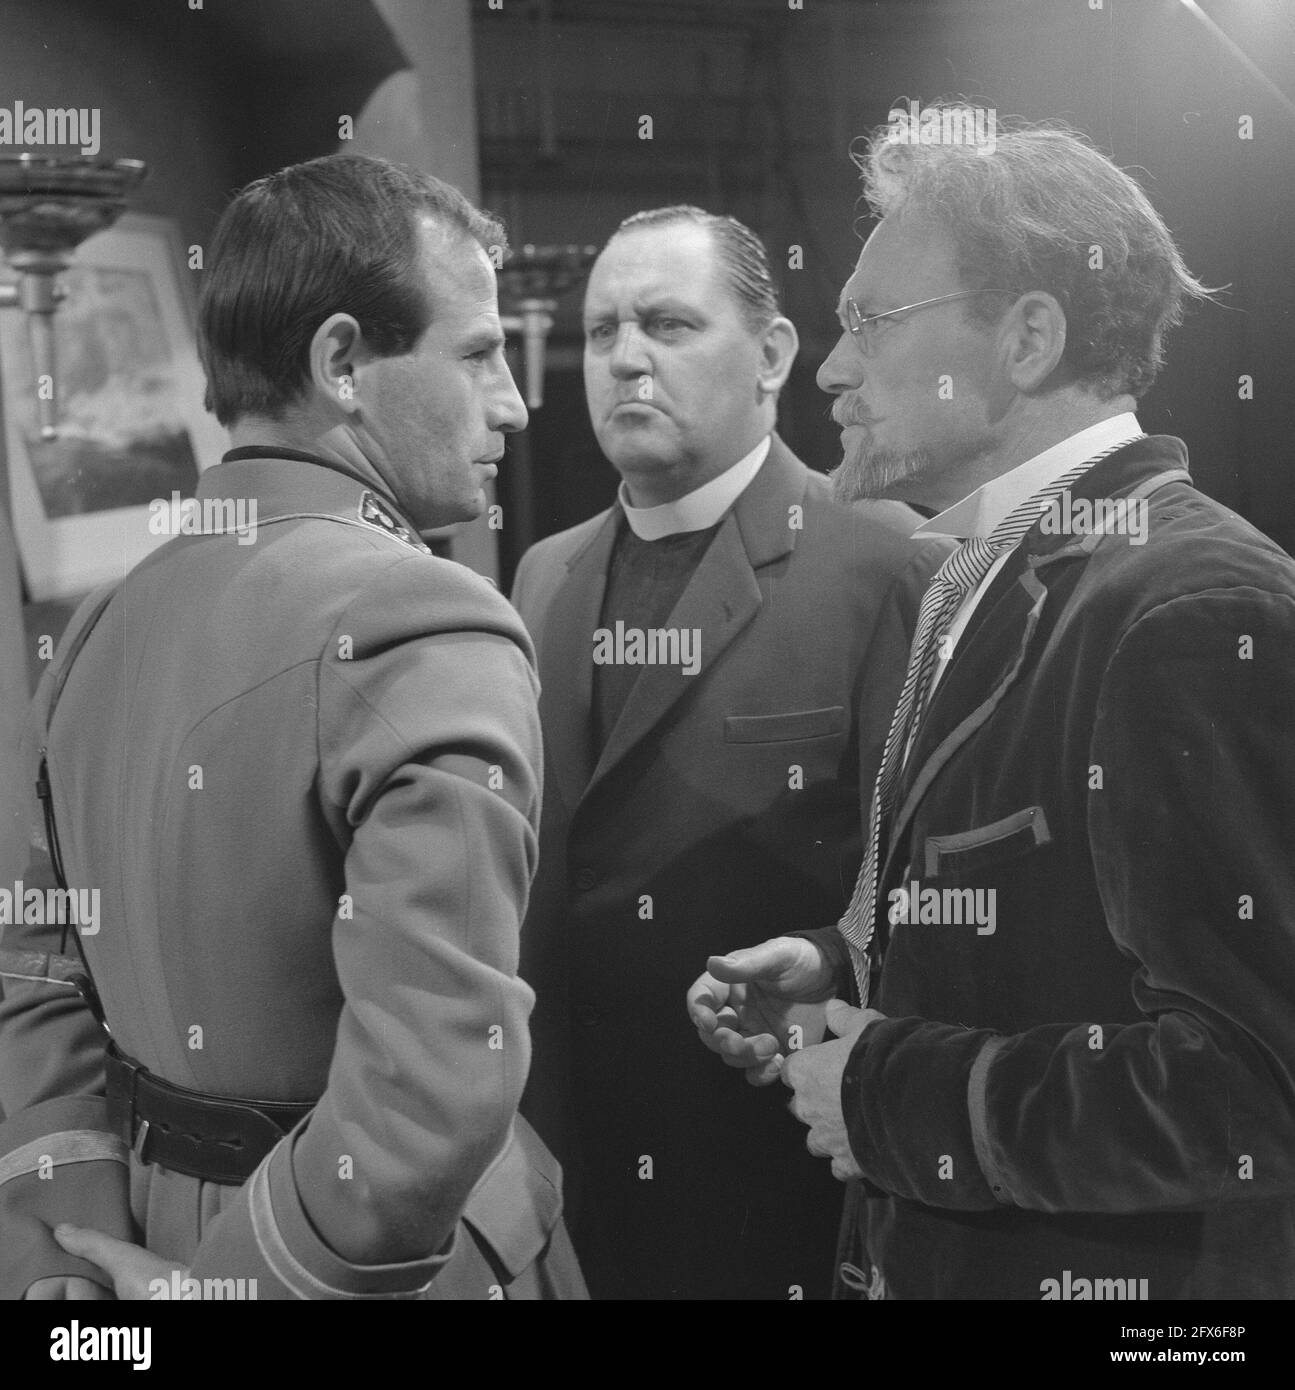 He's at the Crucible, a TV play by VPRO. Flrs. Julien Schoenaerts, Paul Meyer and Max Croiset, October 17, 1962, actors, television dramas, The Netherlands, 20th century press agency photo, news to remember, documentary, historic photography 1945-1990, visual stories, human history of the Twentieth Century, capturing moments in time Stock Photo